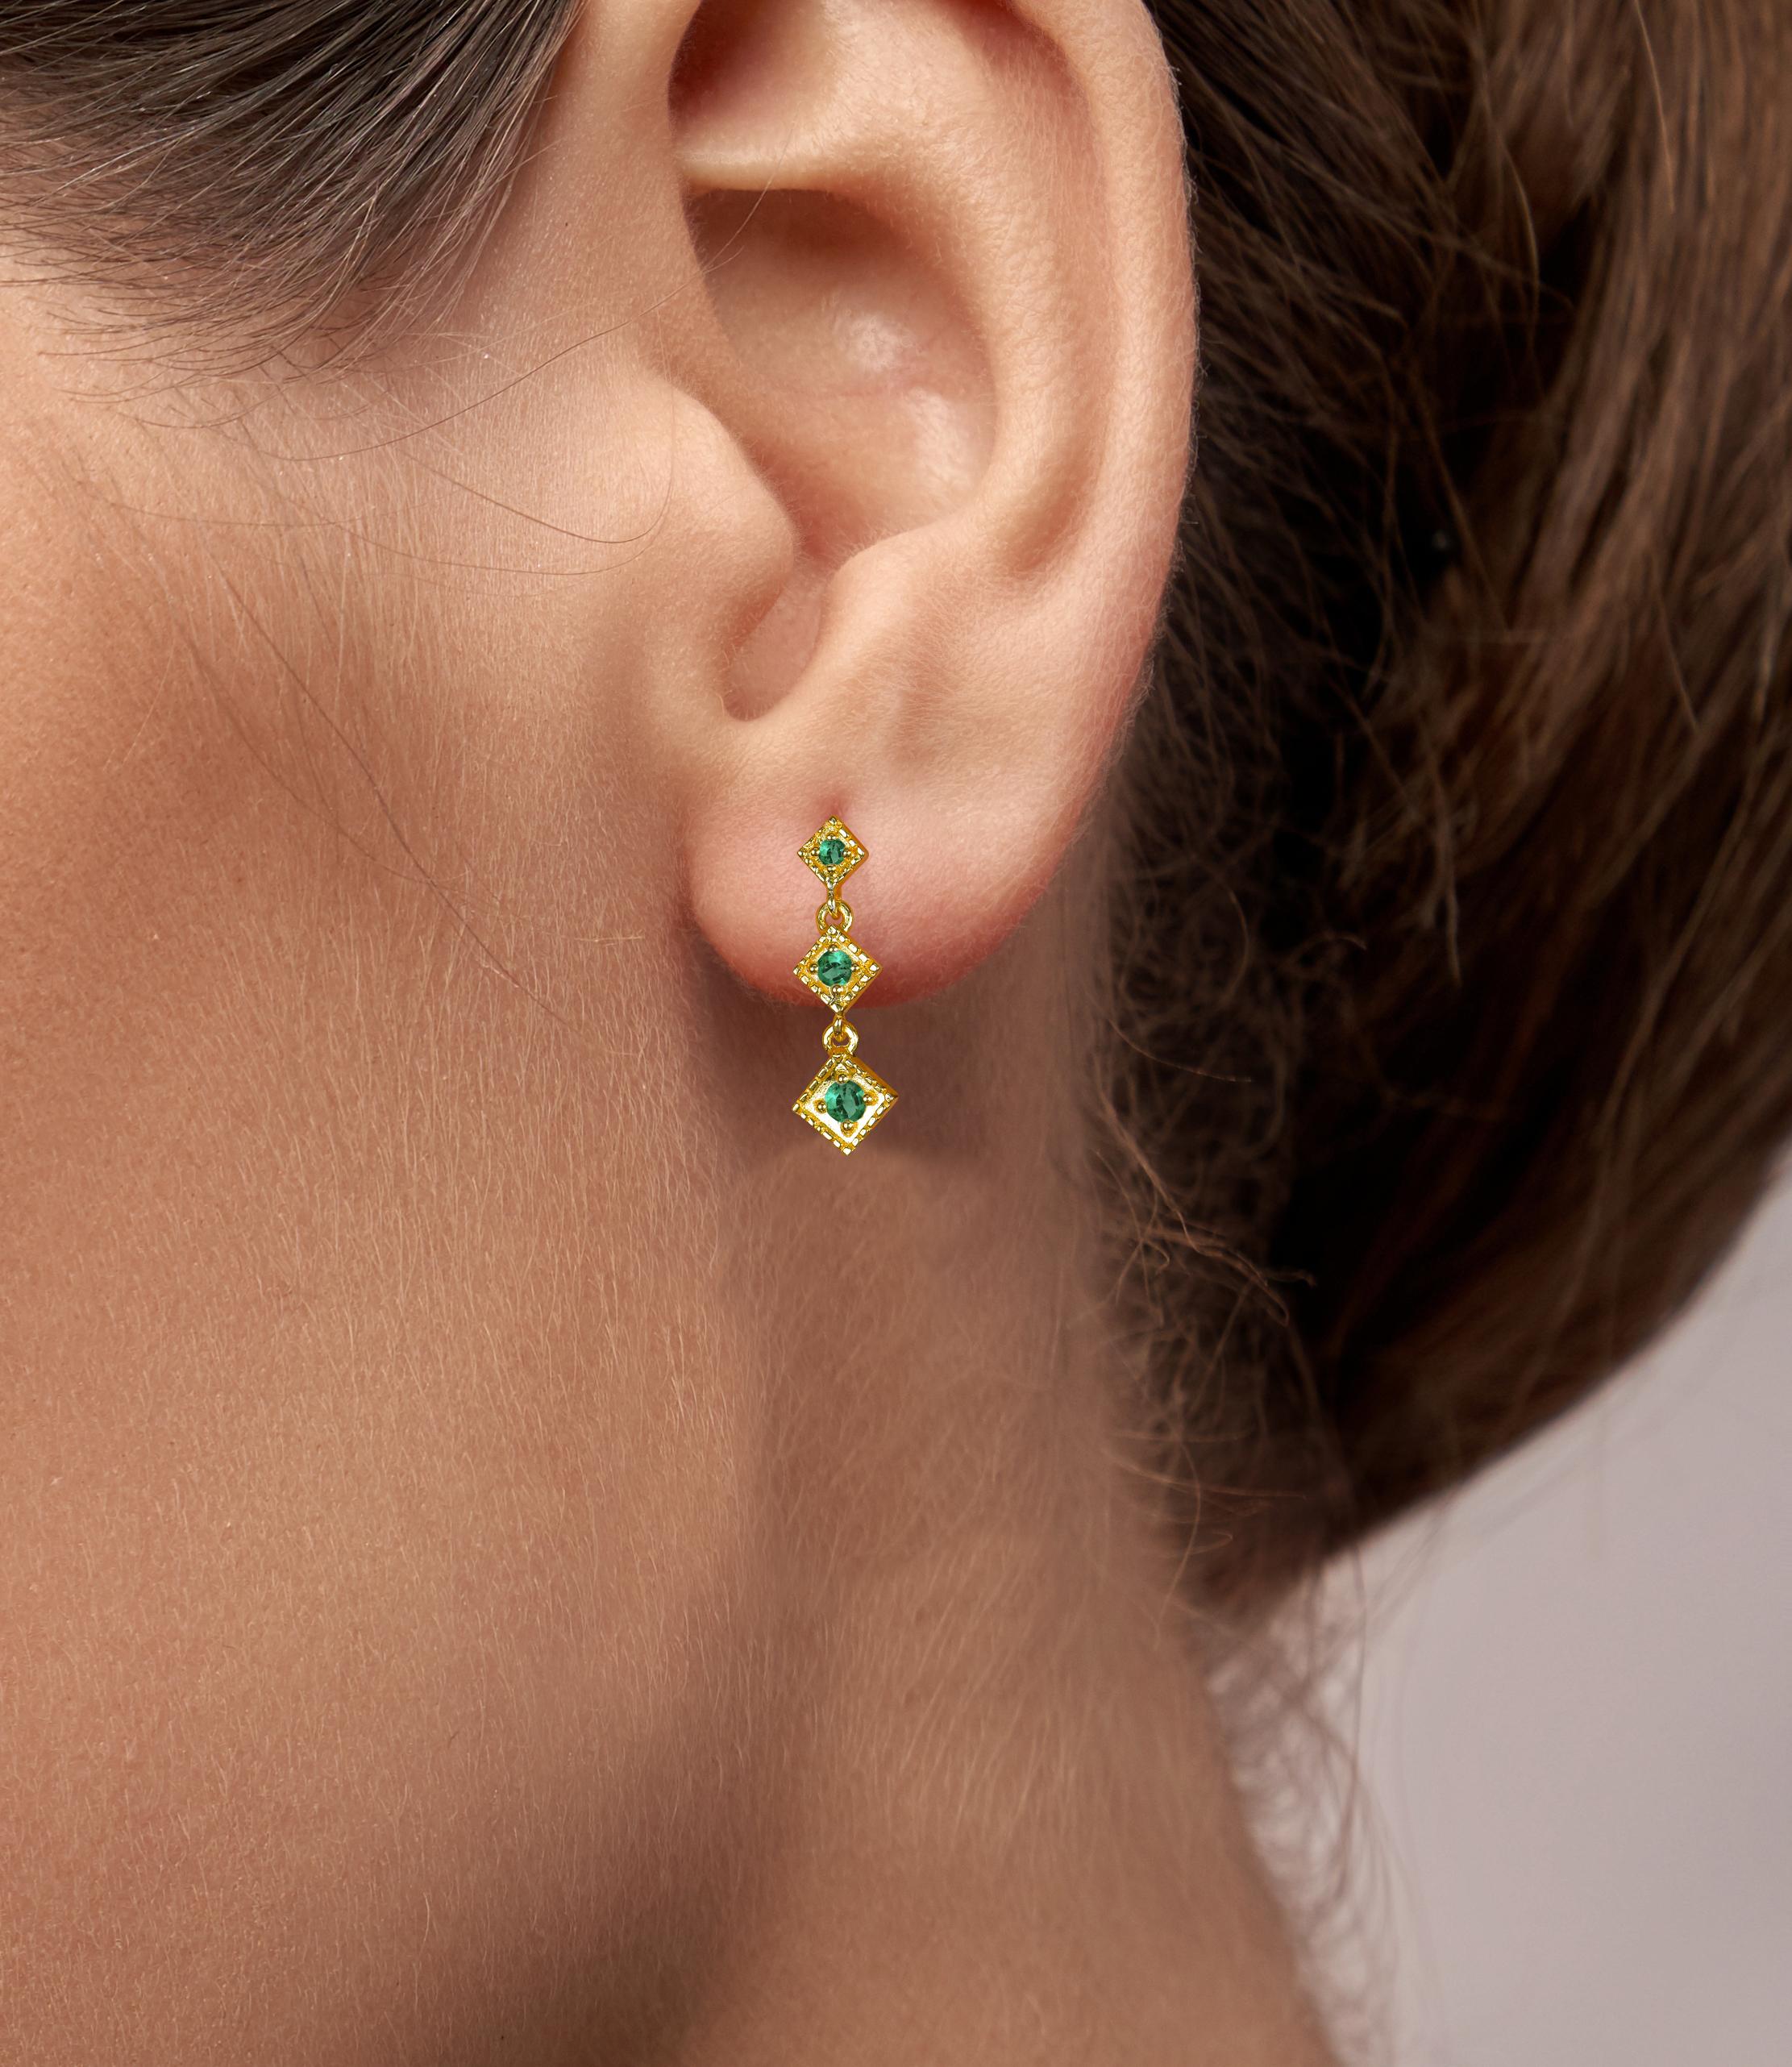 0.09ct Stone Emerald, Ruby and Sapphire Studs Earrings in 18k Gold For Sale 1